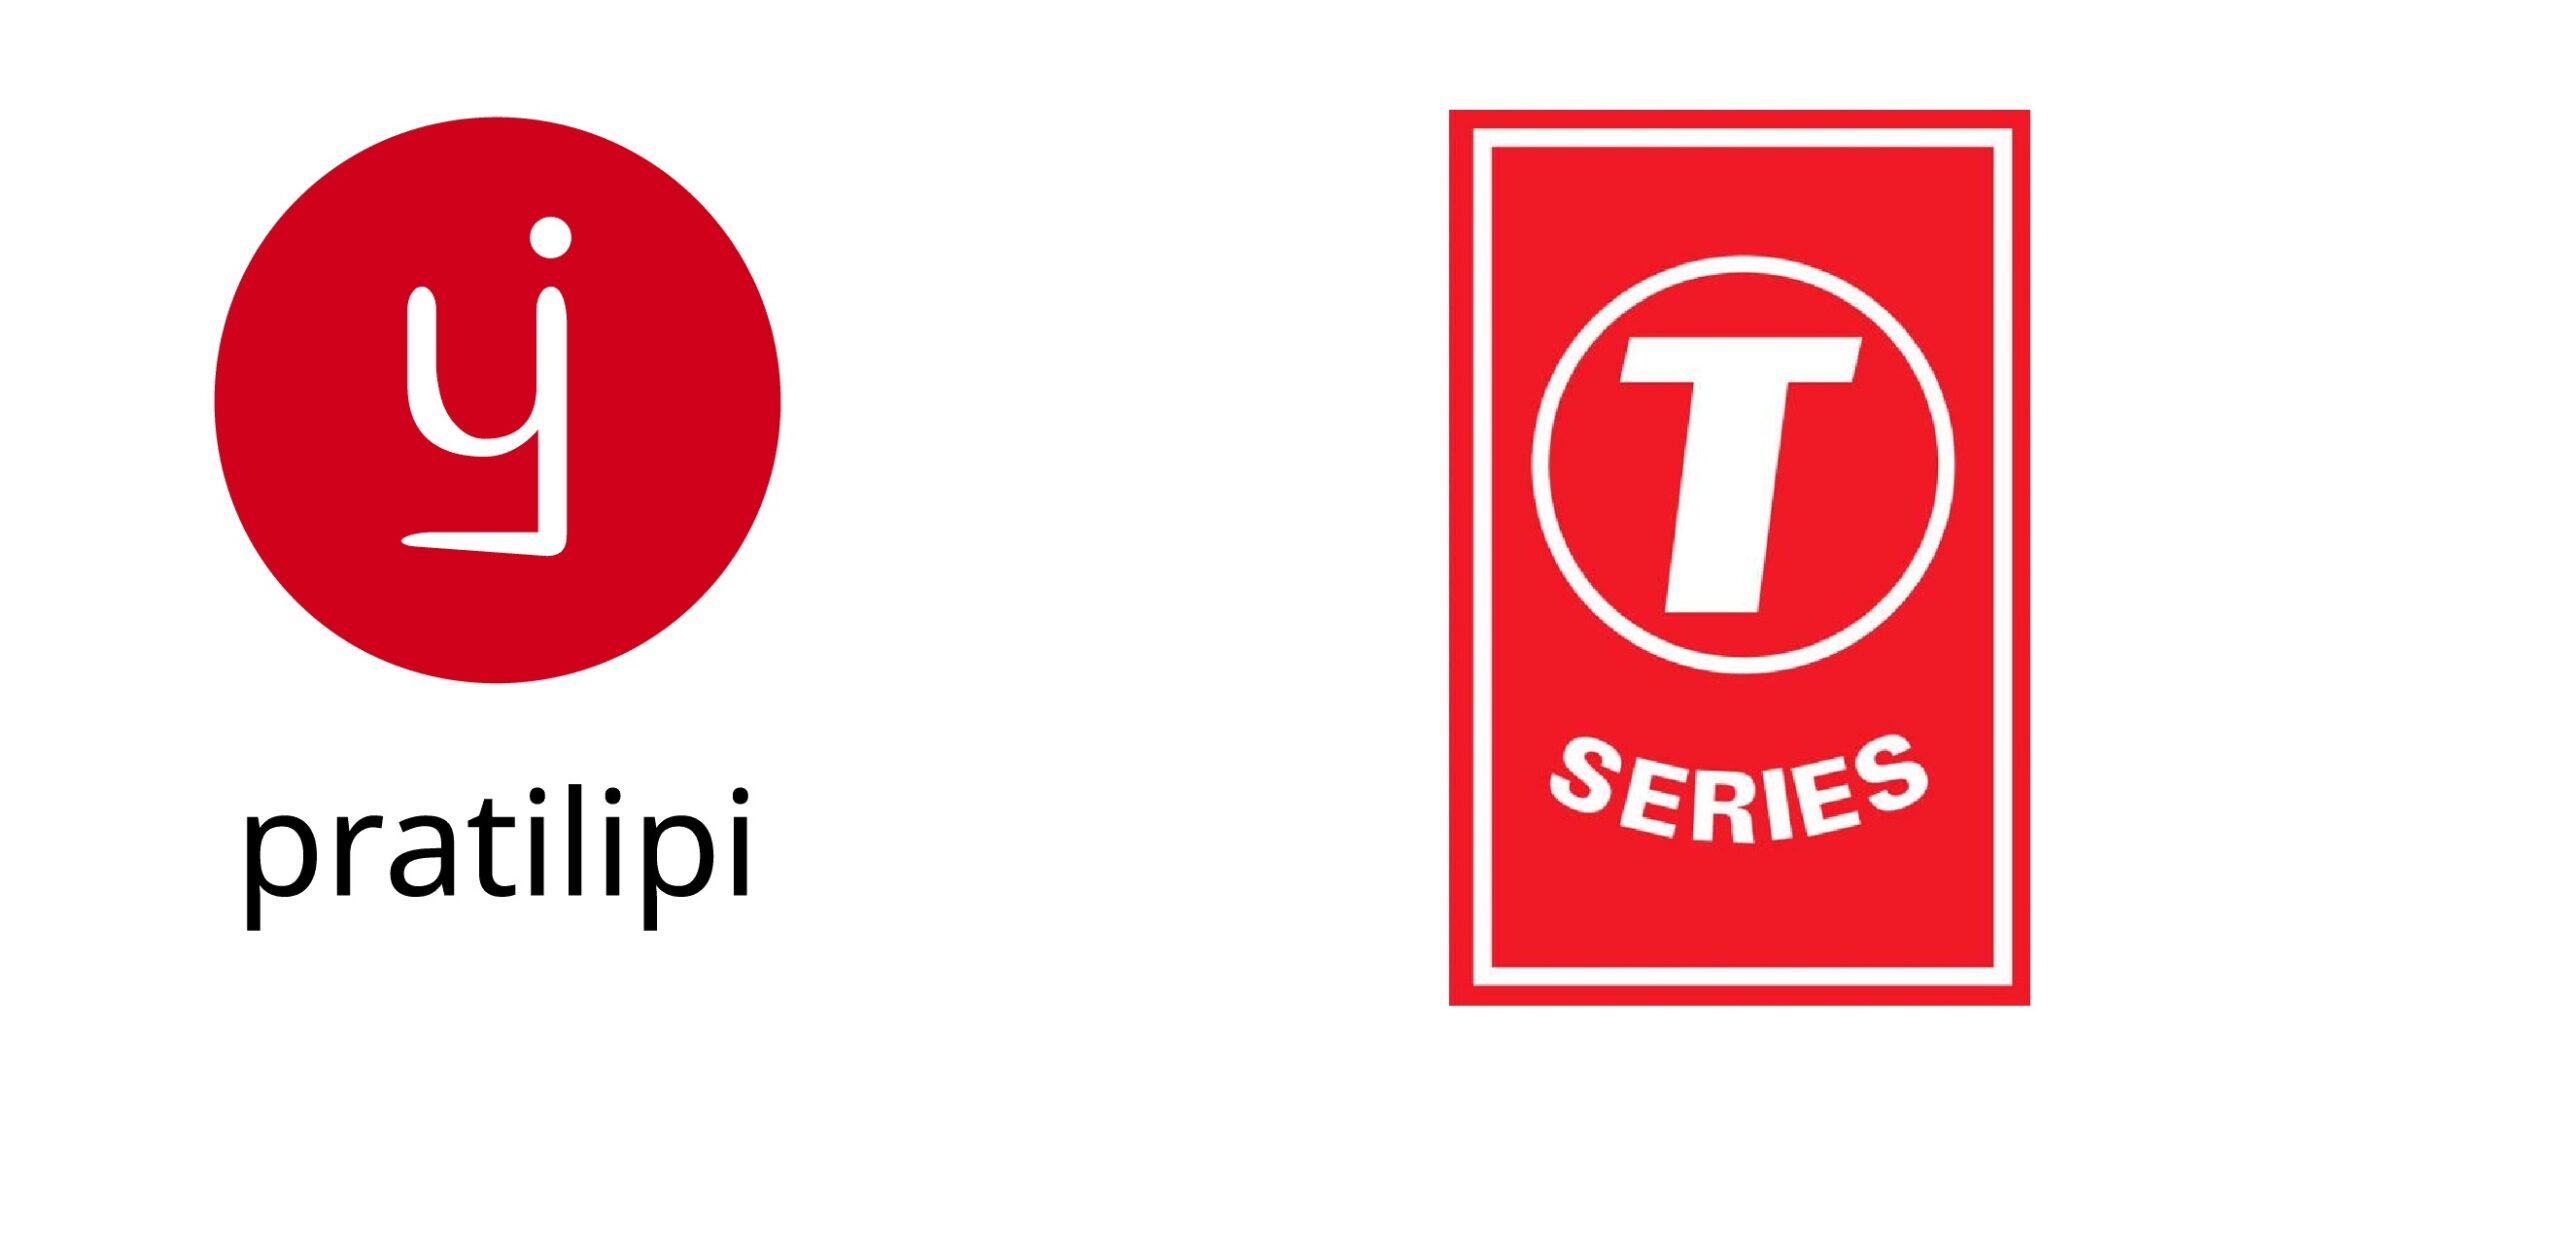 T-Series joins IPRS â€“ A big boost to the Indian Music Publishing Industry